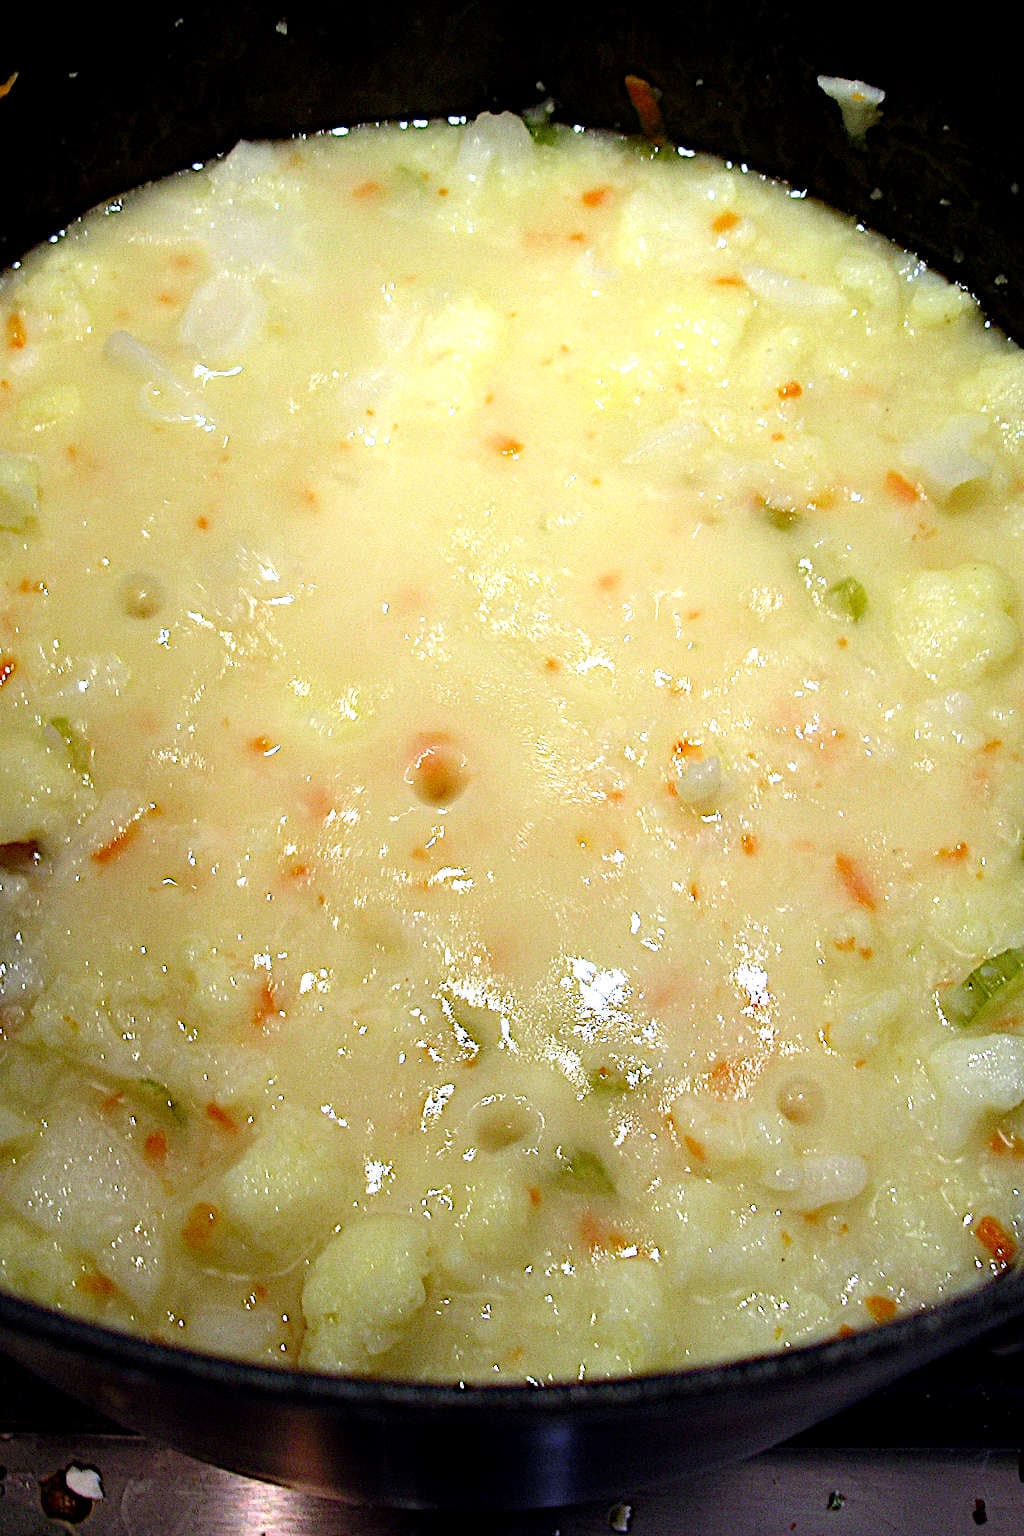 The thickened soup, before adding the dairy.